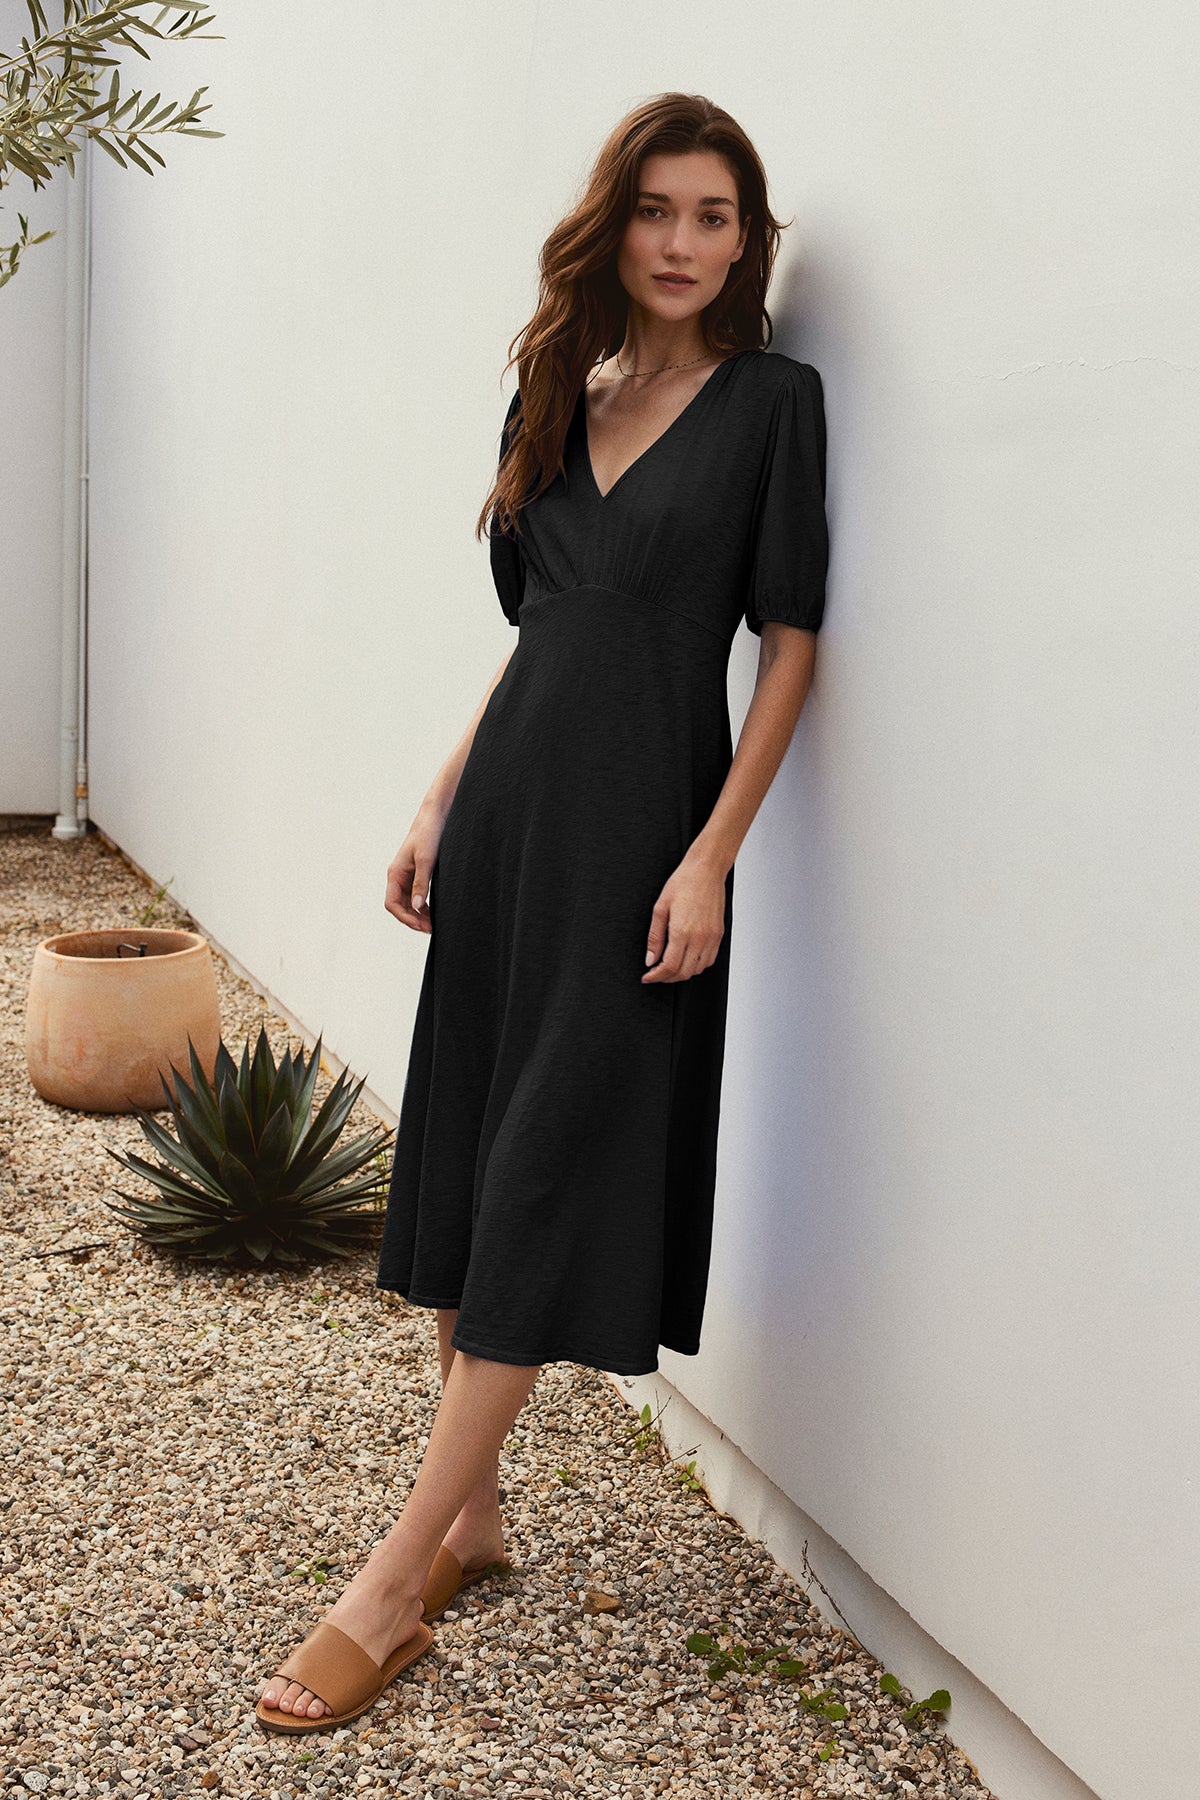 A woman in a figure-skimming black PARKER COTTON SLUB MIDI DRESS by Velvet by Graham & Spencer with puffed sleeves and tan sandals stands against a white wall, next to a small garden with plants in pots.-37185421967553